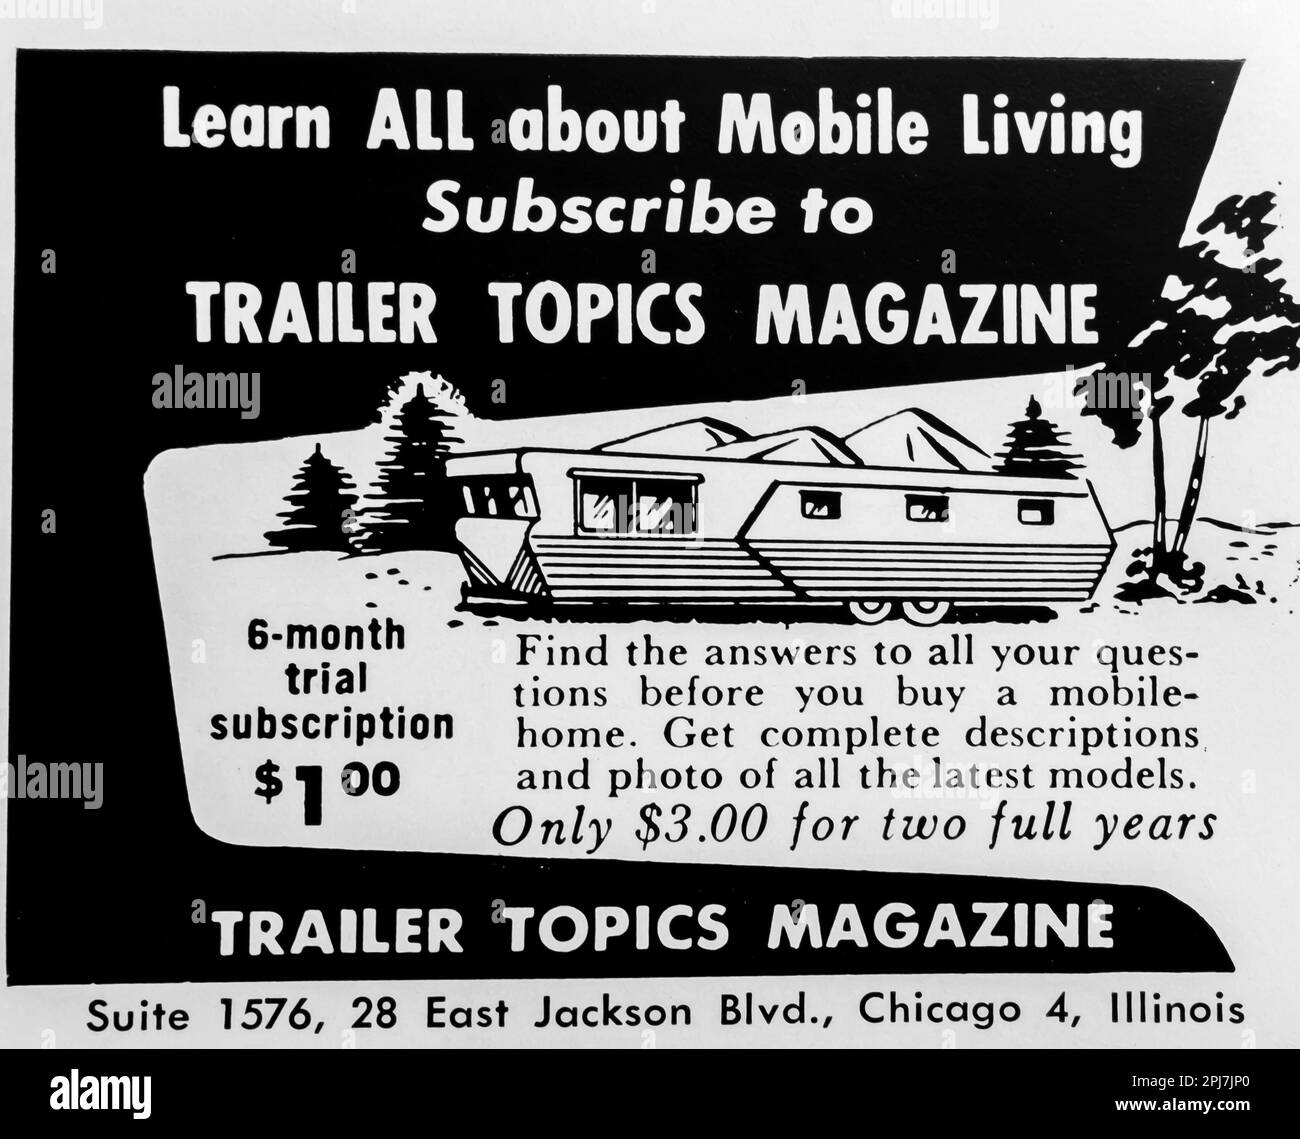 Trailer Topics Magazine subscription - mobile iving advert in a Natgeo magazine, February 1958 Stock Photo